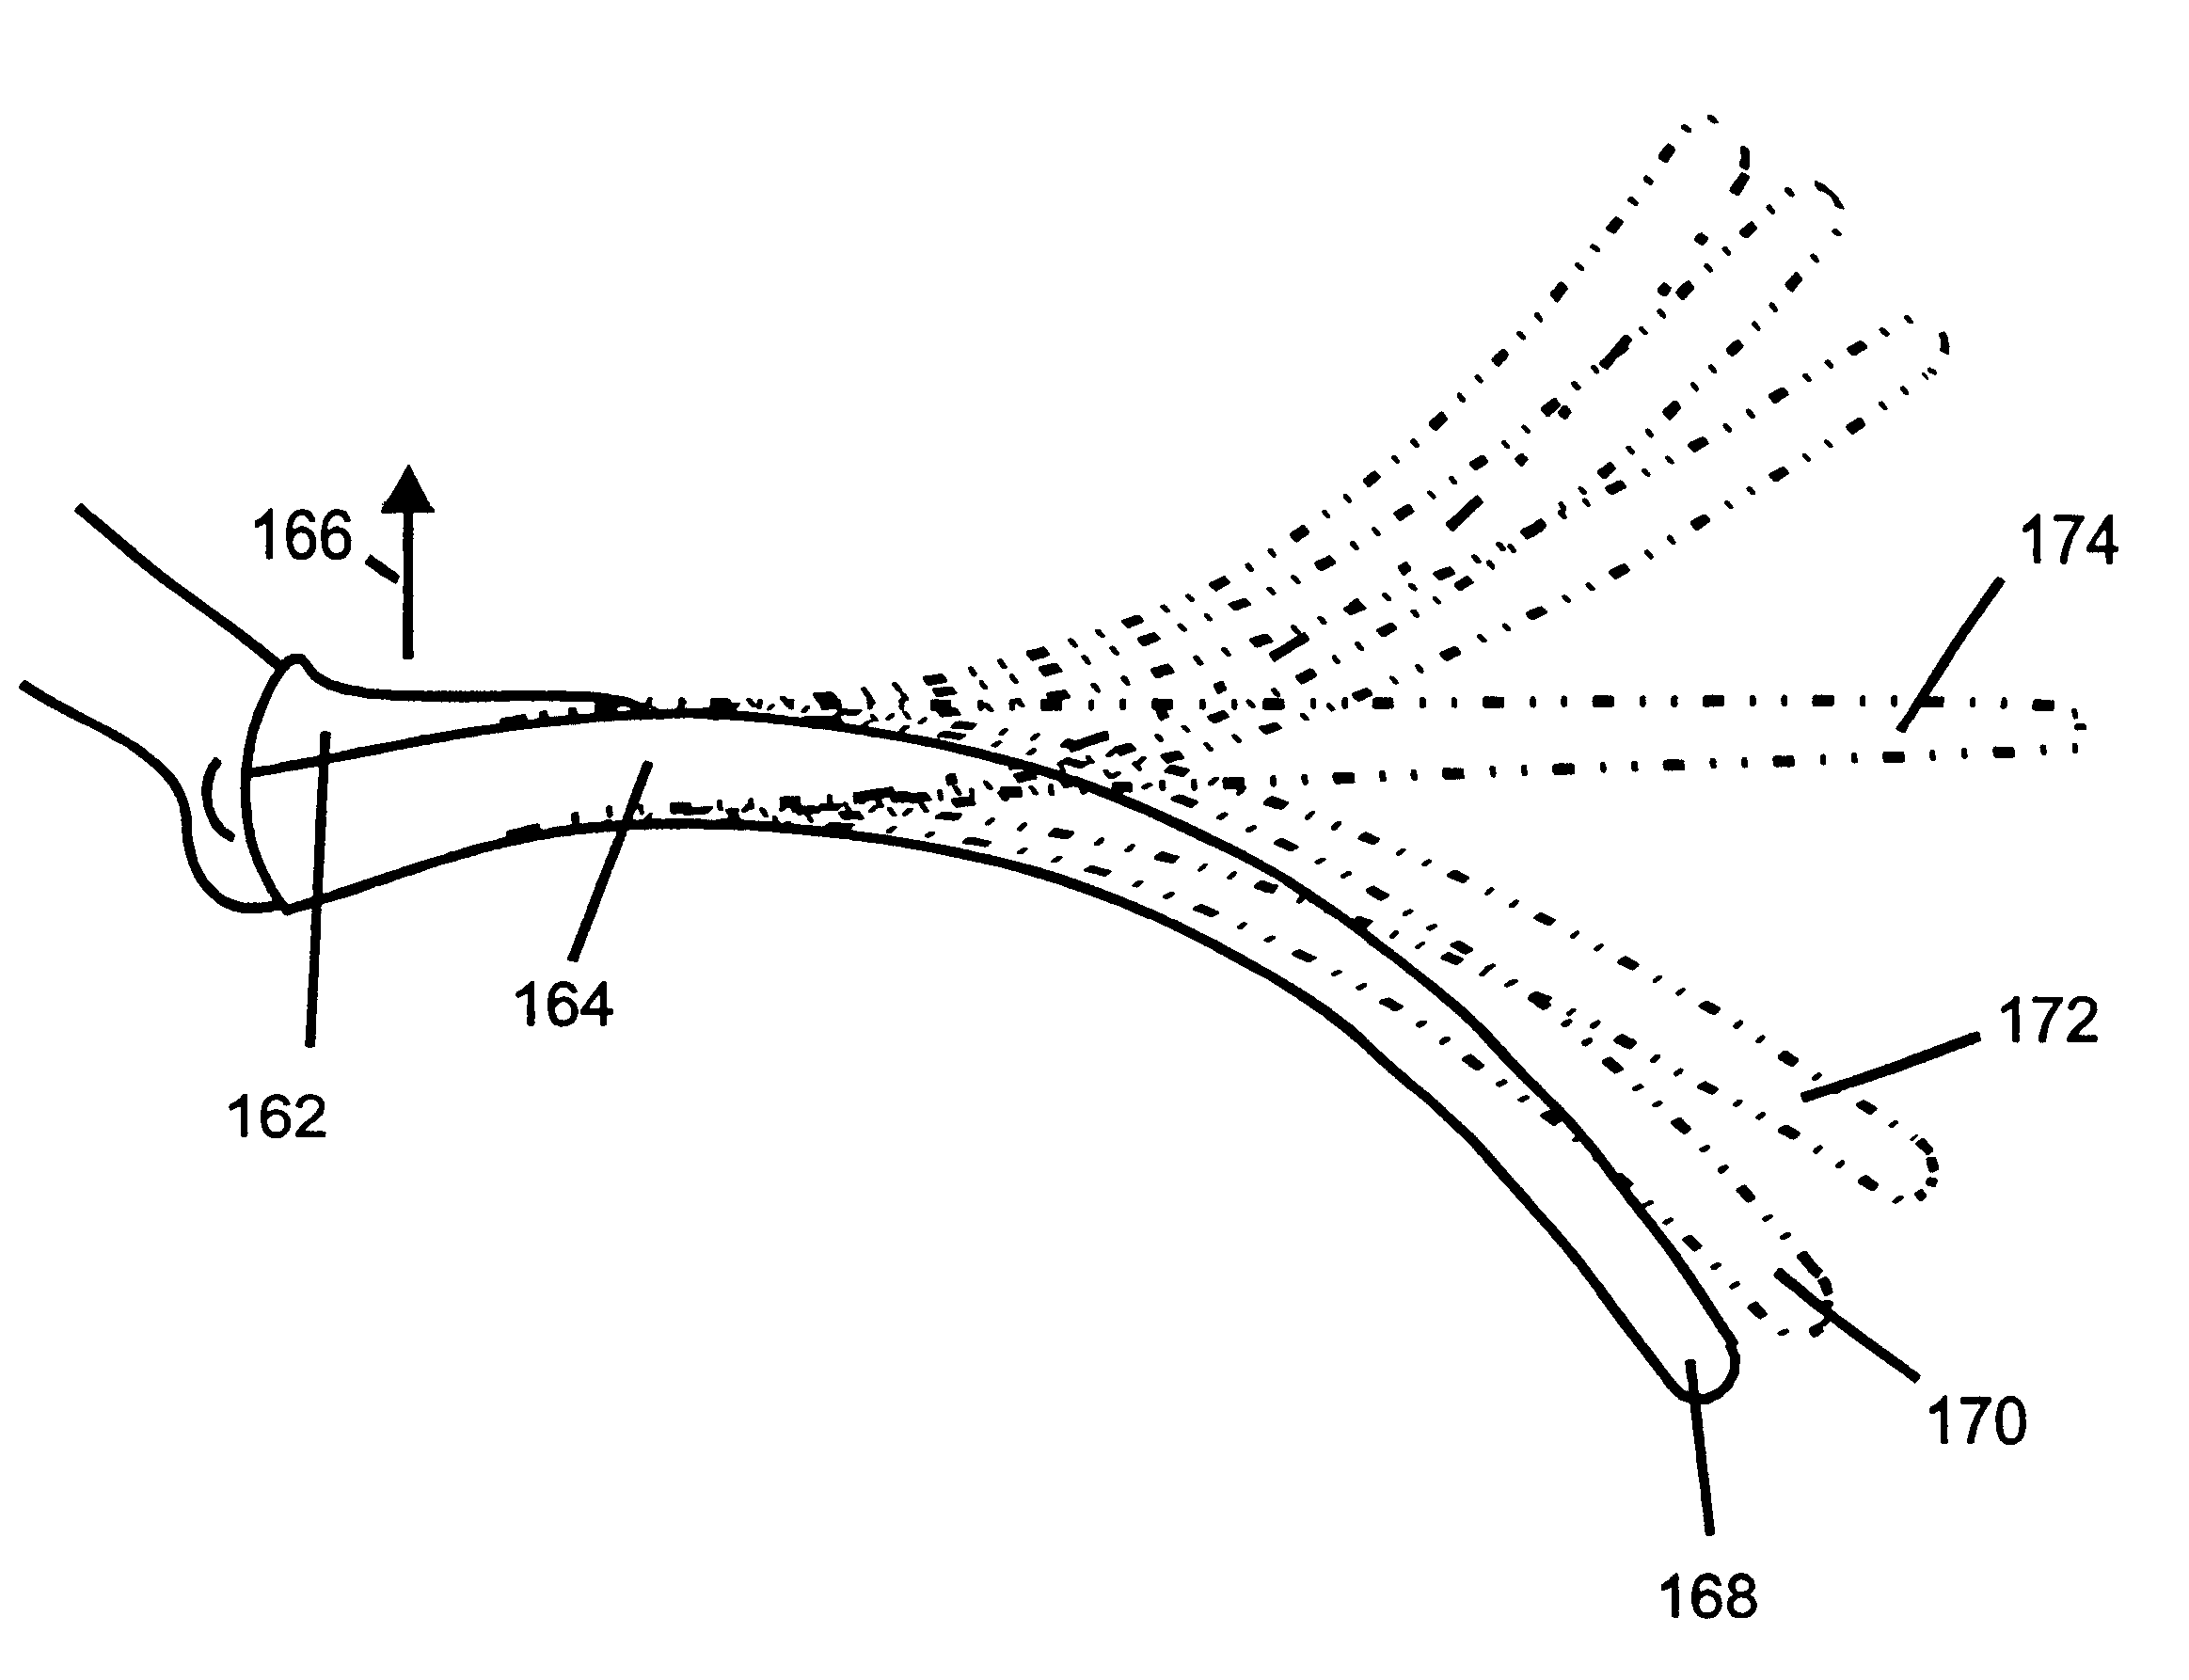 Methods for creating consistent large scale blade deflections